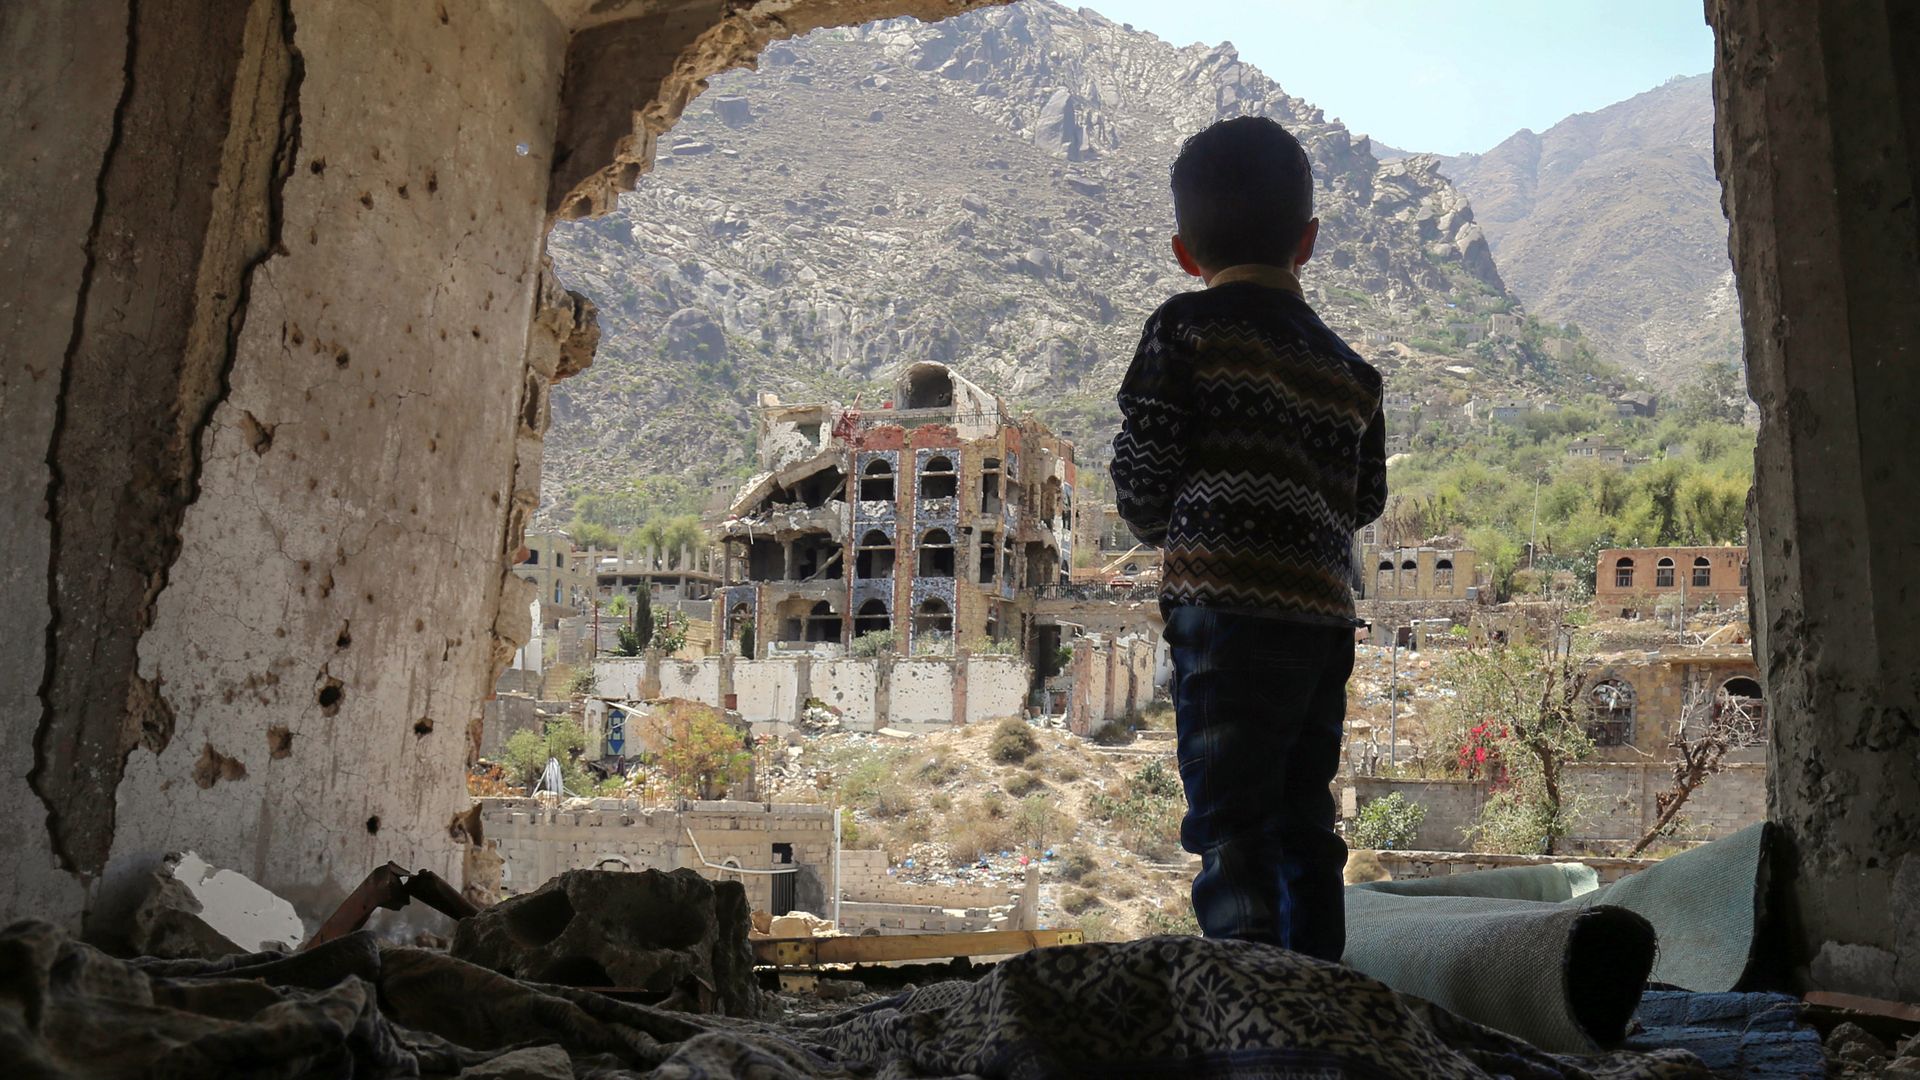 A child in Yemen looking at destroyed buildings.